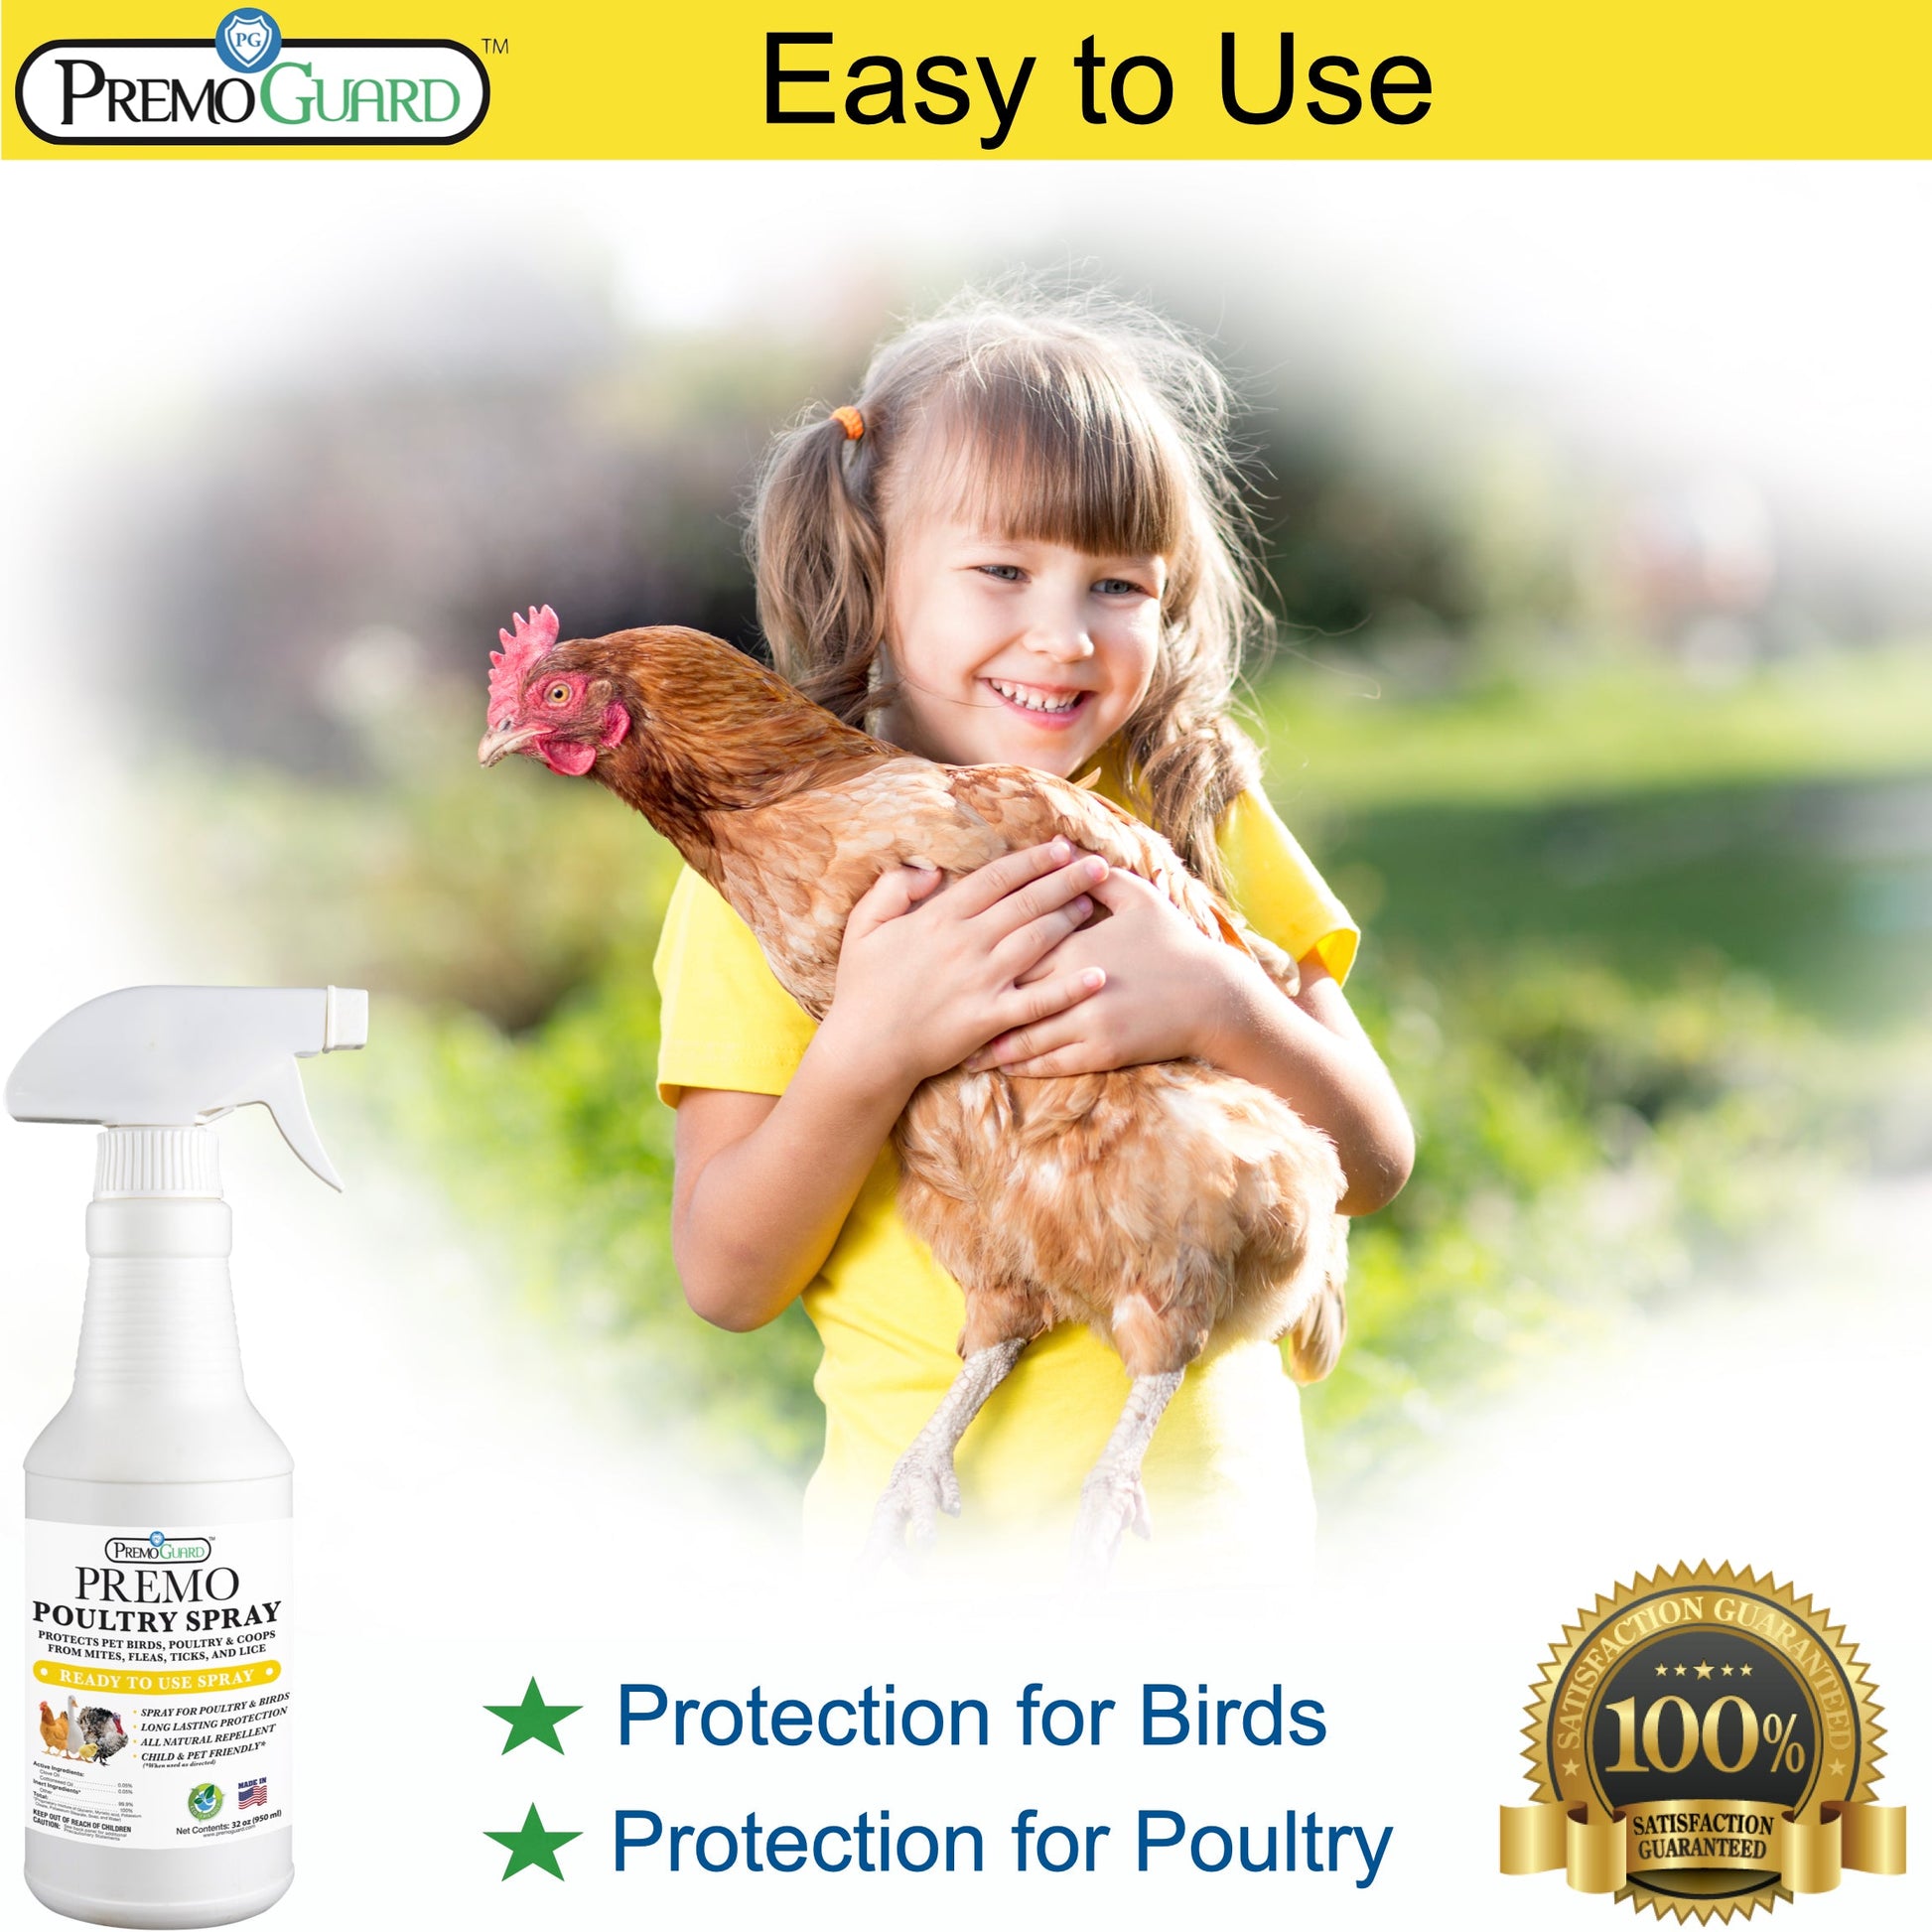 Premo Guard Poultry Spray is easy to use.